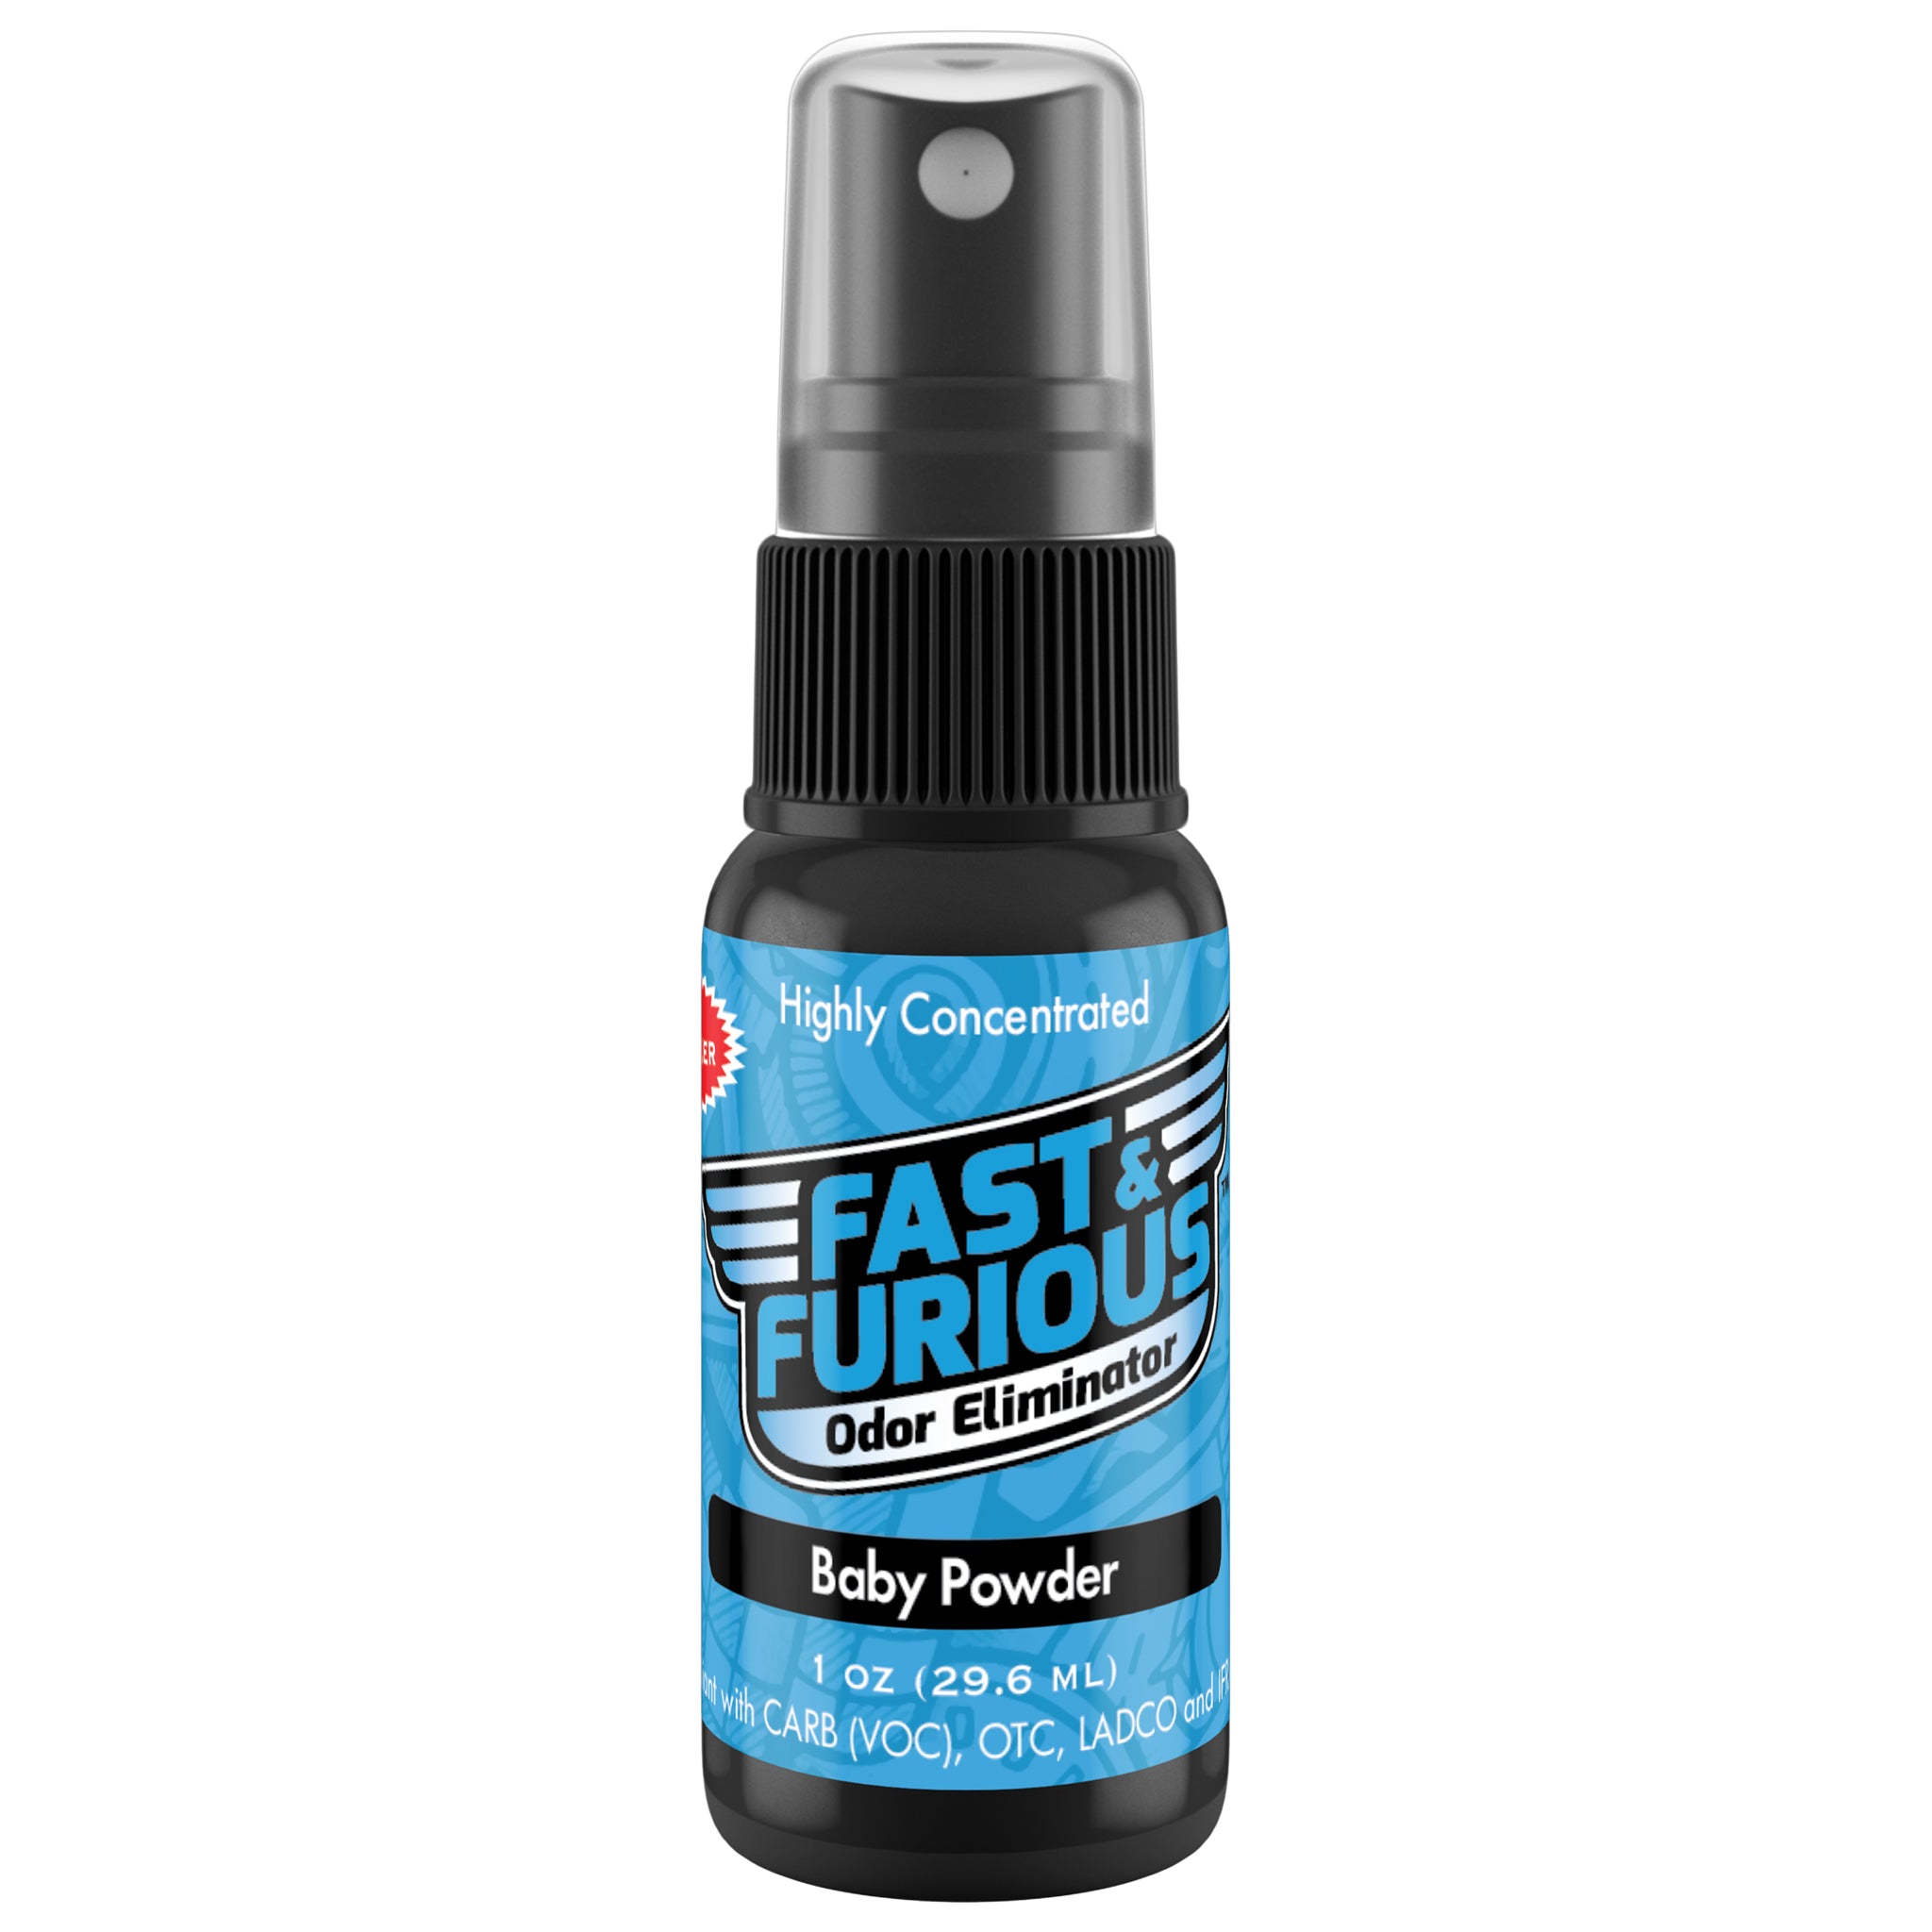 Fast and Furious Odor Eliminator - Baby Powder Scent